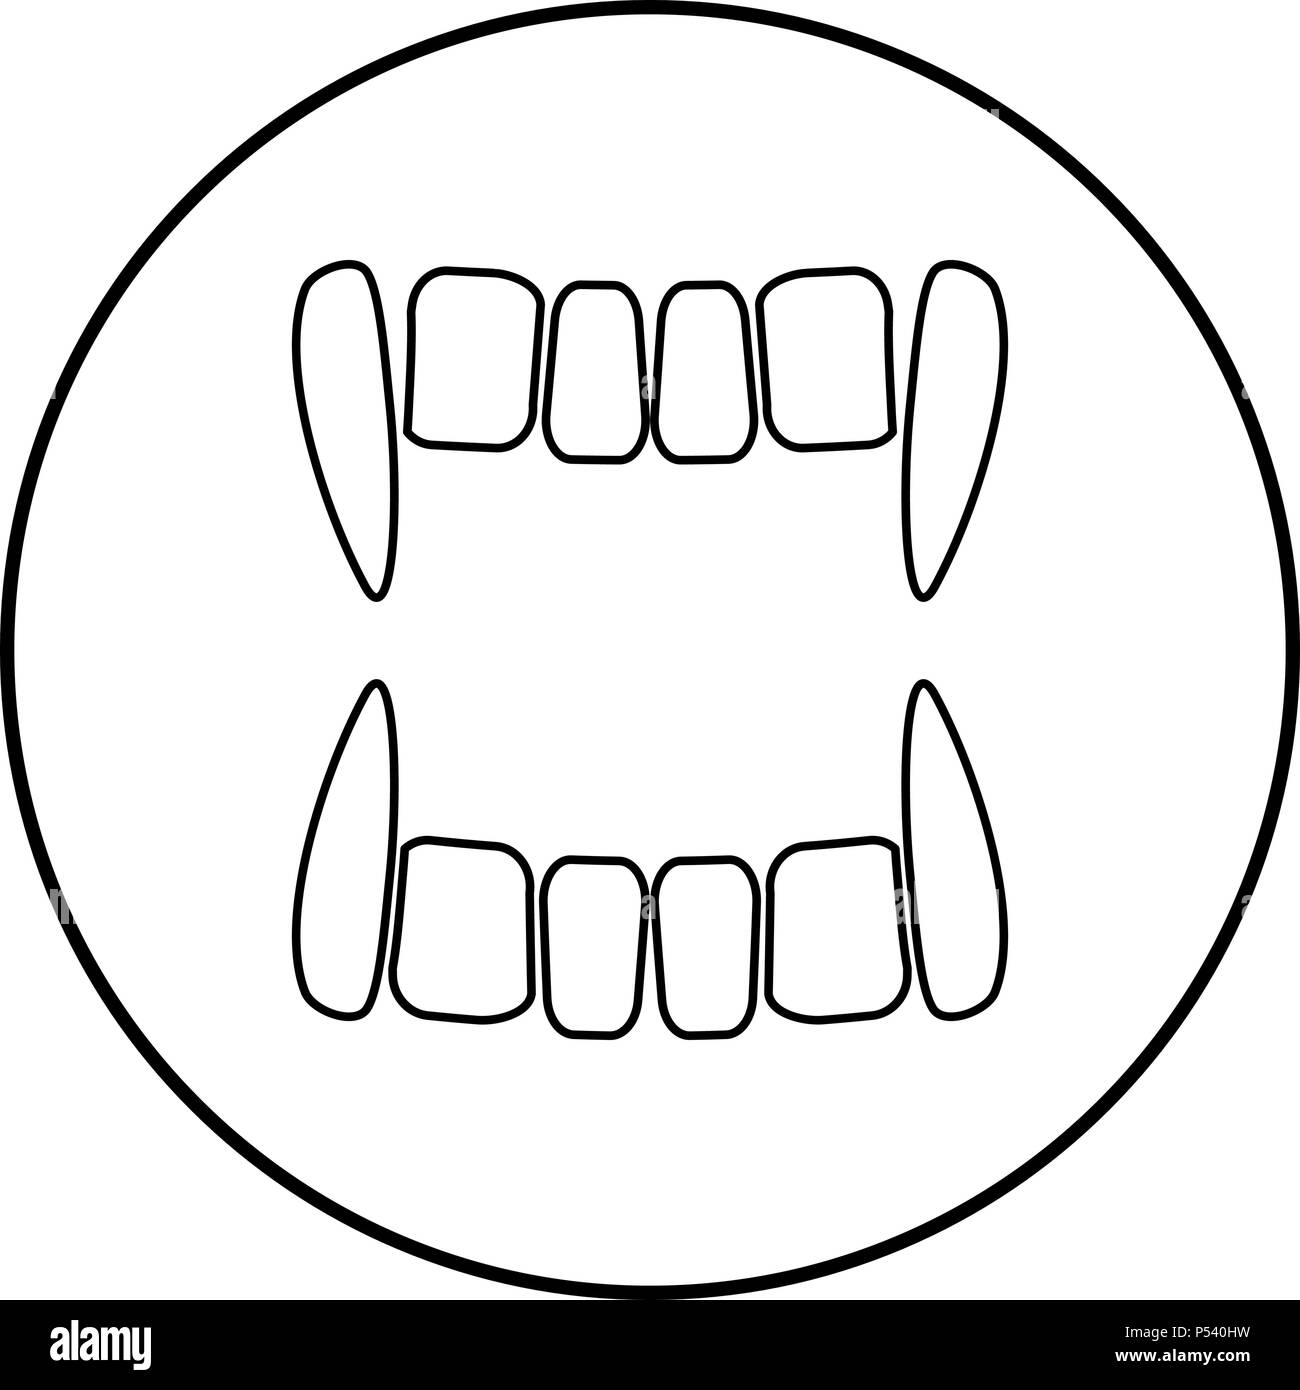 Vampire's teeths icon black color in circle round outline Stock Vector